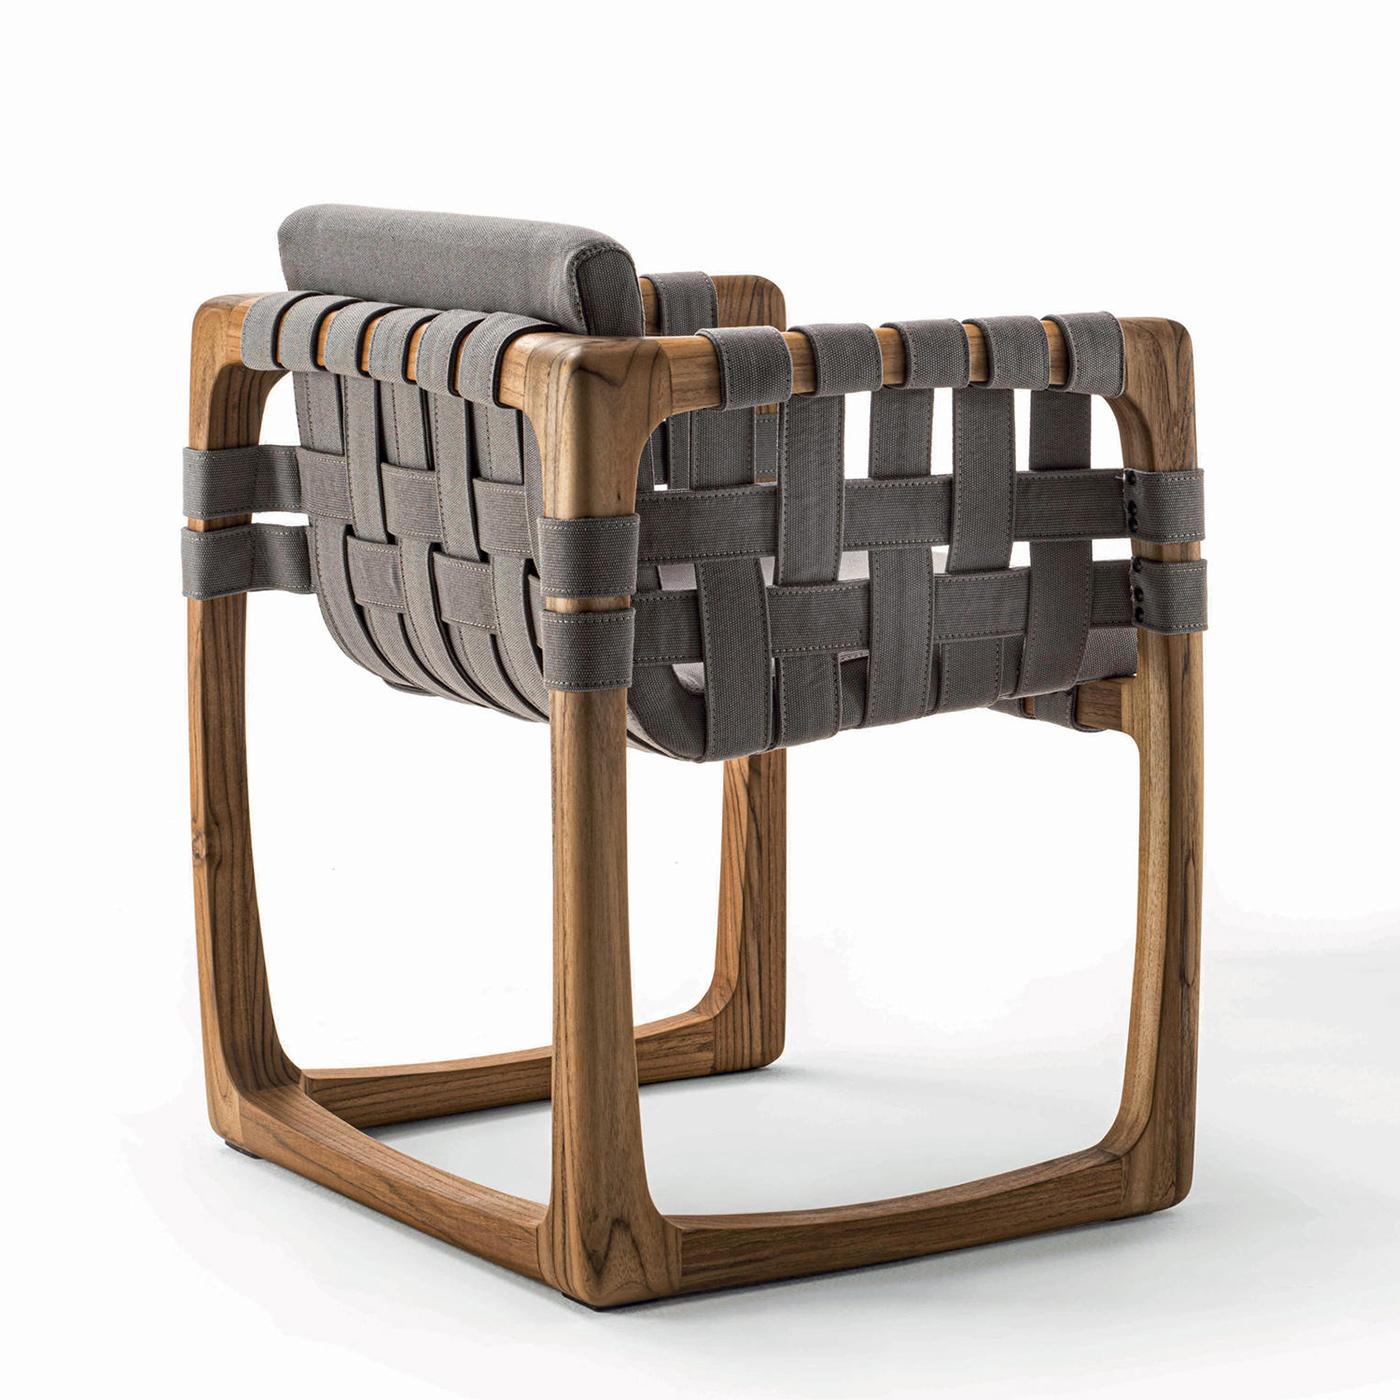 Chair webbing outdoor with structure in solid
natural teak wood. Upholstered and covered with
special outdoor fabric in light grey finish.
Treated with natural pine extract wax.